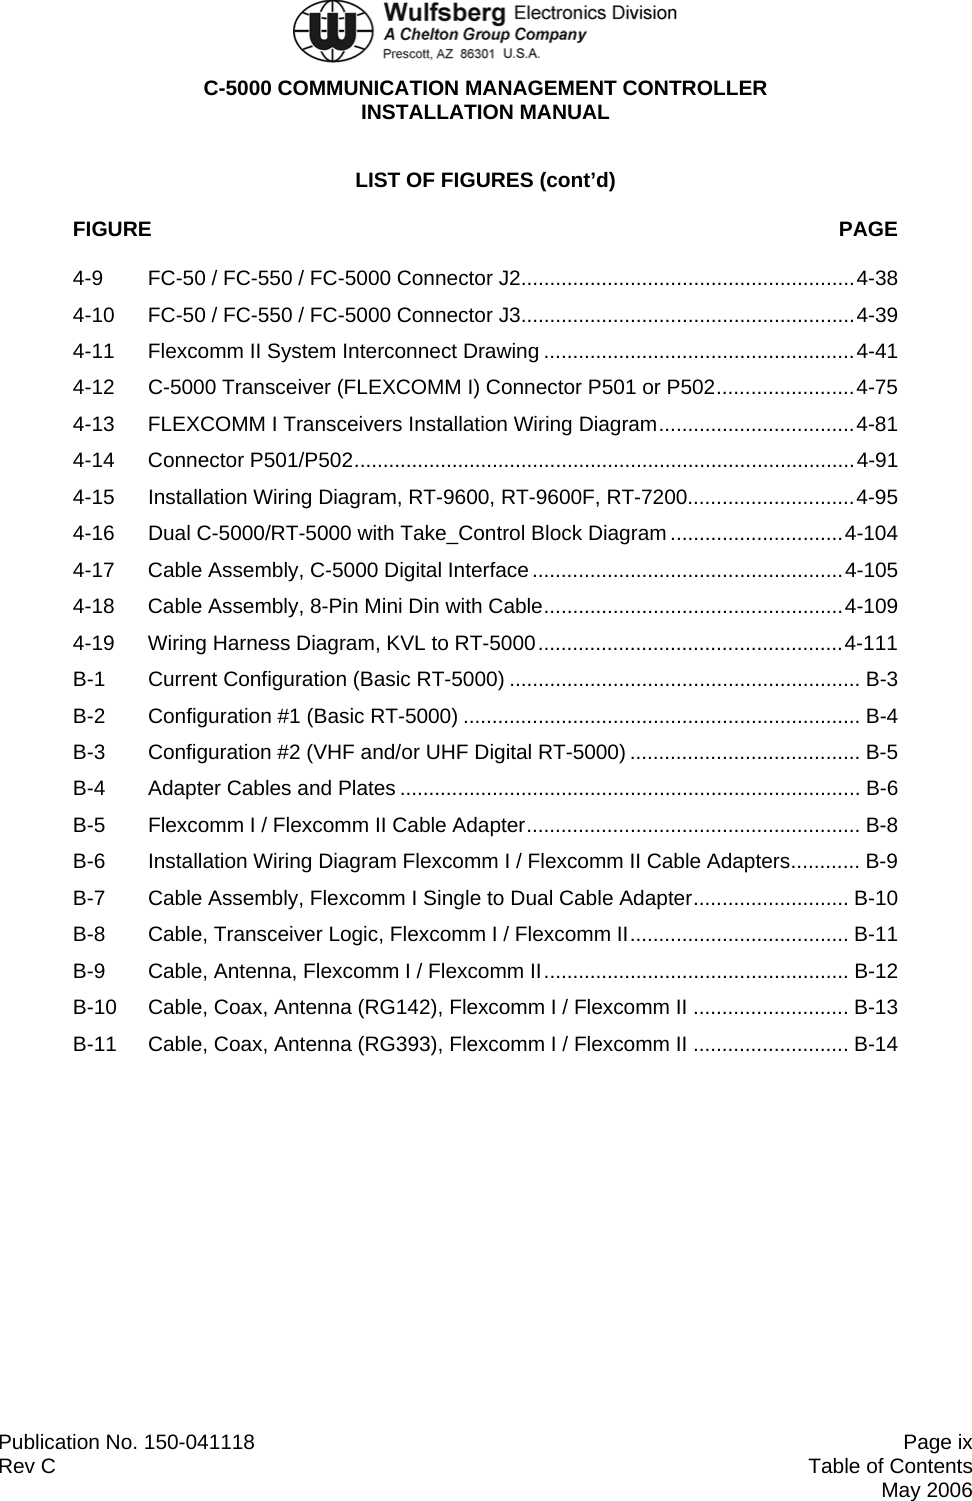  C-5000 COMMUNICATION MANAGEMENT CONTROLLER INSTALLATION MANUAL  Publication No. 150-041118  Page ix Rev C  Table of Contents  May 2006 LIST OF FIGURES (cont’d) FIGURE  PAGE 4-9  FC-50 / FC-550 / FC-5000 Connector J2..........................................................4-38 4-10  FC-50 / FC-550 / FC-5000 Connector J3..........................................................4-39 4-11  Flexcomm II System Interconnect Drawing ......................................................4-41 4-12 C-5000 Transceiver (FLEXCOMM I) Connector P501 or P502........................4-75 4-13  FLEXCOMM I Transceivers Installation Wiring Diagram..................................4-81 4-14 Connector P501/P502.......................................................................................4-91 4-15 Installation Wiring Diagram, RT-9600, RT-9600F, RT-7200.............................4-95 4-16 Dual C-5000/RT-5000 with Take_Control Block Diagram..............................4-104 4-17  Cable Assembly, C-5000 Digital Interface ......................................................4-105 4-18  Cable Assembly, 8-Pin Mini Din with Cable....................................................4-109 4-19 Wiring Harness Diagram, KVL to RT-5000.....................................................4-111 B-1 Current Configuration (Basic RT-5000) ............................................................. B-3 B-2  Configuration #1 (Basic RT-5000) ..................................................................... B-4 B-3  Configuration #2 (VHF and/or UHF Digital RT-5000) ........................................ B-5 B-4 Adapter Cables and Plates ................................................................................ B-6 B-5  Flexcomm I / Flexcomm II Cable Adapter.......................................................... B-8 B-6  Installation Wiring Diagram Flexcomm I / Flexcomm II Cable Adapters............ B-9 B-7  Cable Assembly, Flexcomm I Single to Dual Cable Adapter........................... B-10 B-8  Cable, Transceiver Logic, Flexcomm I / Flexcomm II...................................... B-11 B-9  Cable, Antenna, Flexcomm I / Flexcomm II..................................................... B-12 B-10  Cable, Coax, Antenna (RG142), Flexcomm I / Flexcomm II ........................... B-13 B-11  Cable, Coax, Antenna (RG393), Flexcomm I / Flexcomm II ........................... B-14 